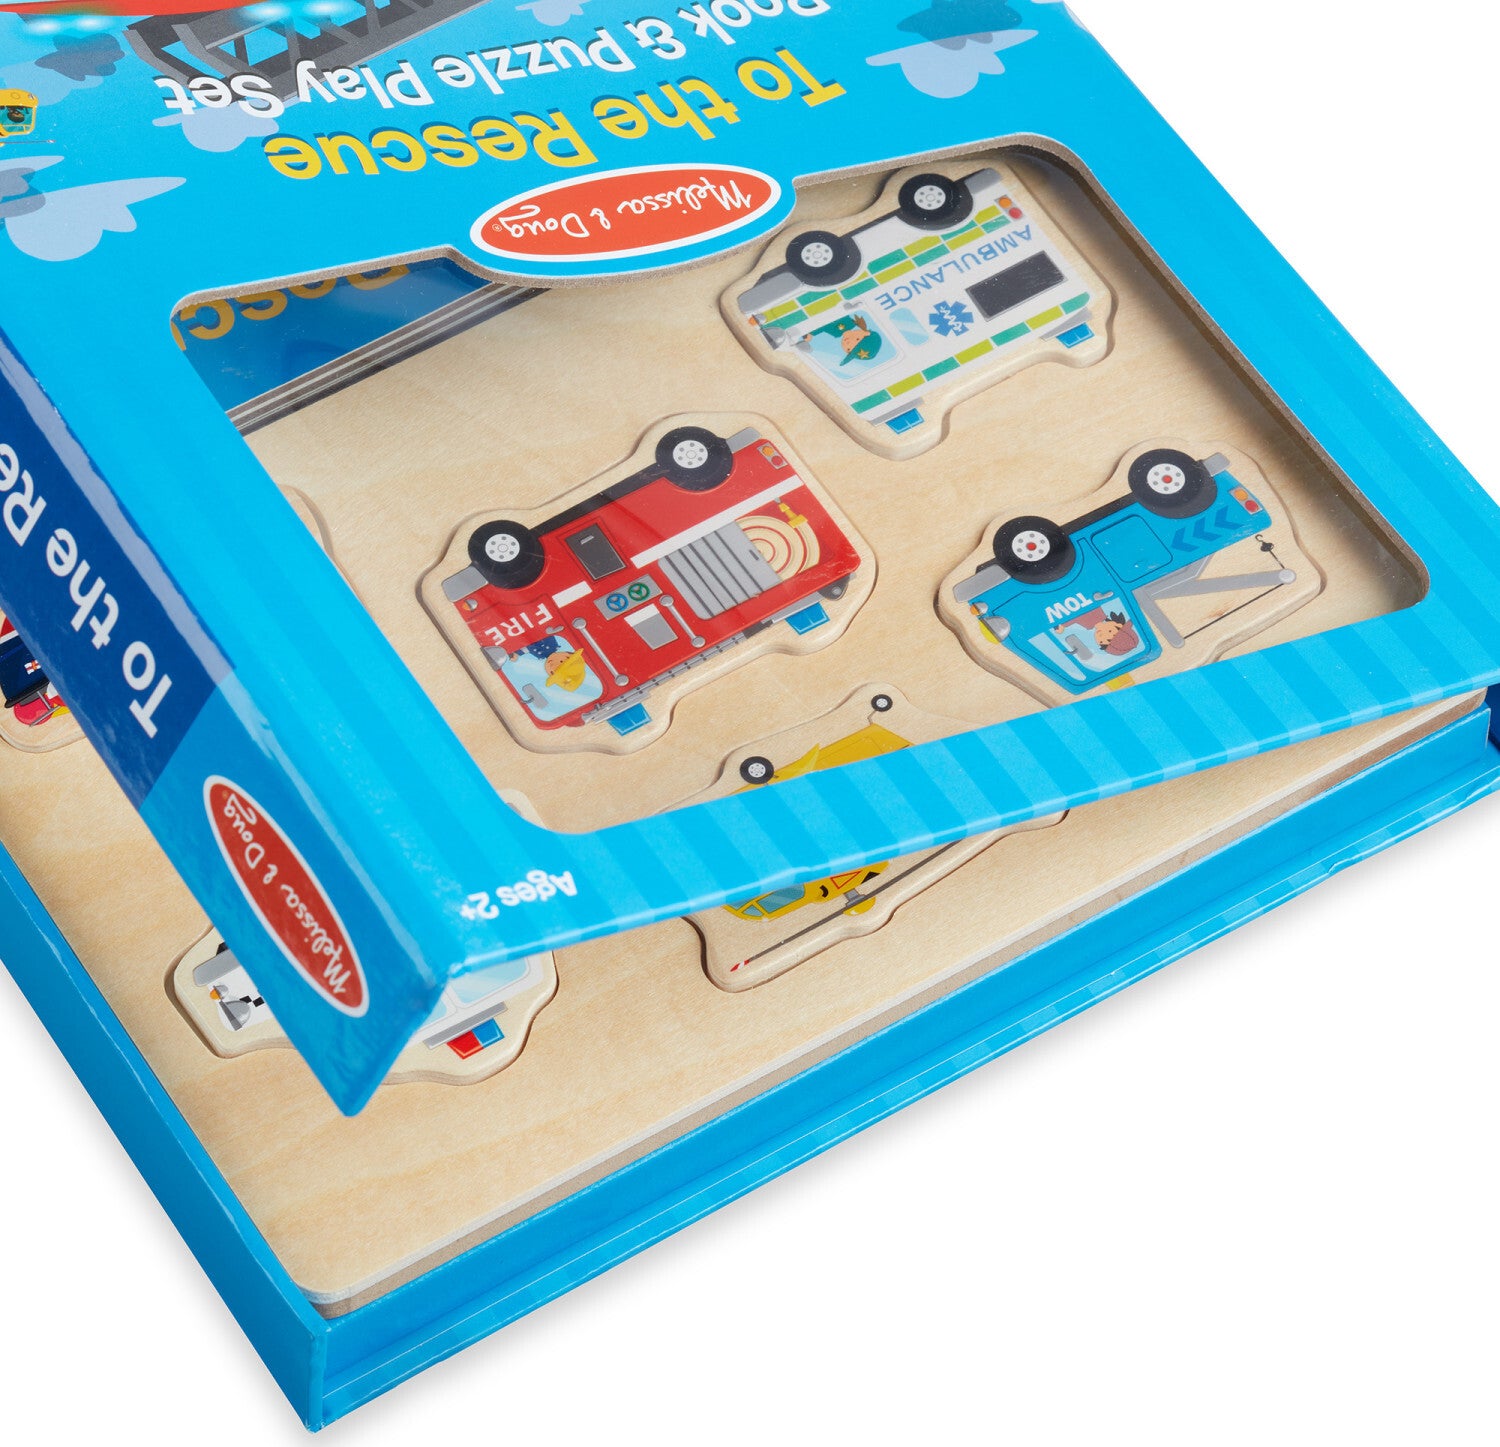 Book &amp; Puzzle Play Set: To the Rescue